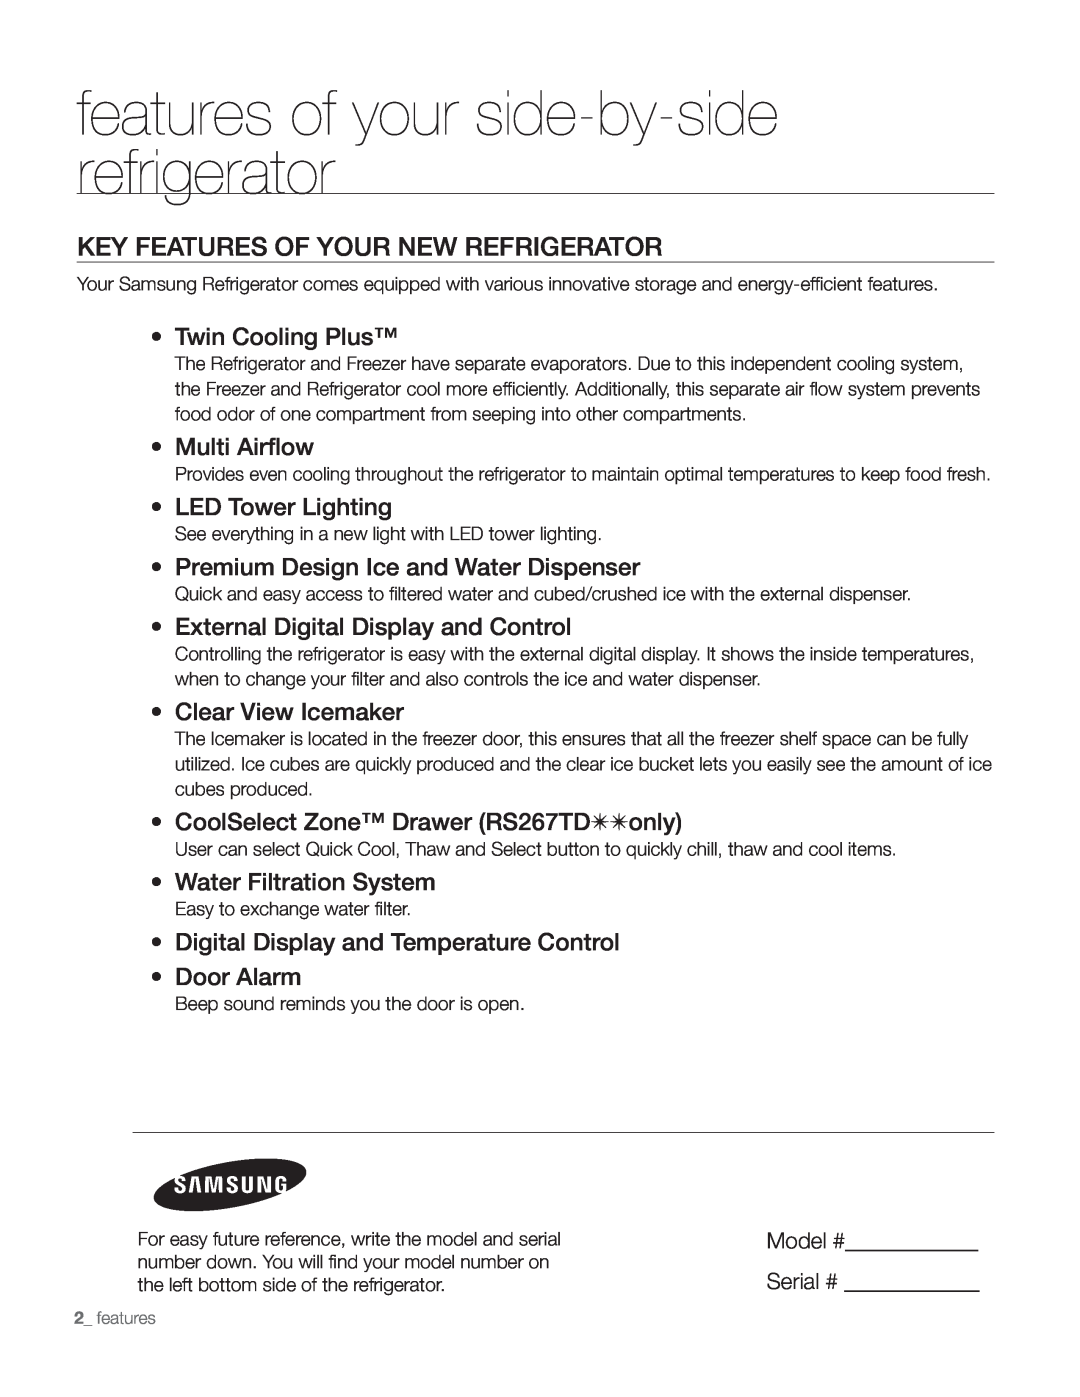 Samsung DA68-01890Q user manual features of your side-by-siderefrigerator, Key Features Of Your New Refrigerator 